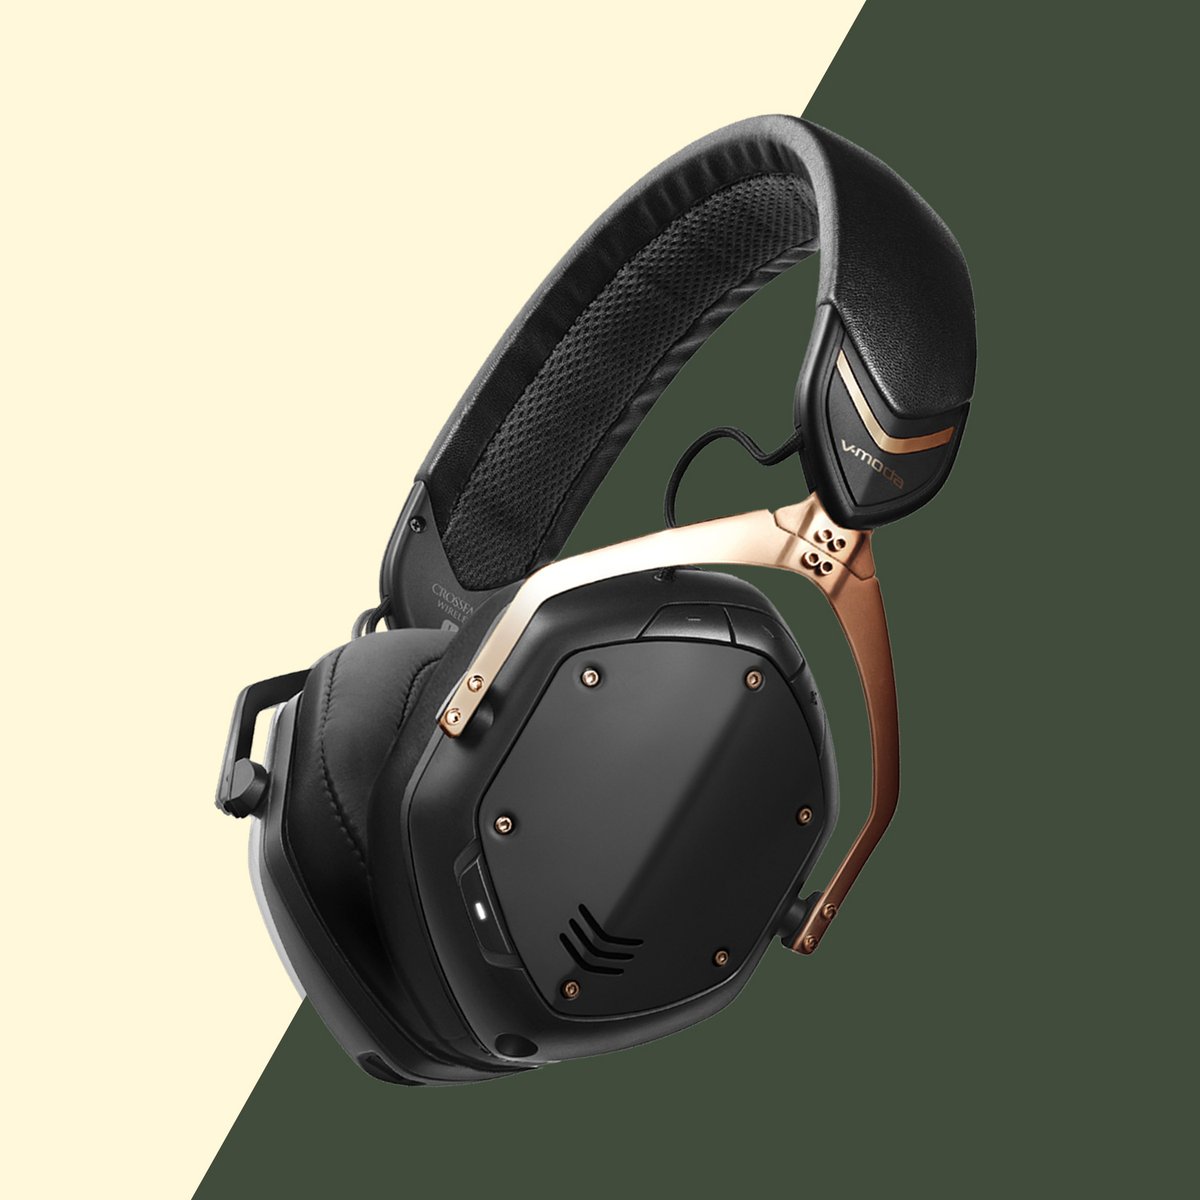 Those lines, that form, that shine 😍 What's your favorite thing about the Crossfade 2 Wireless in Rose Gold? Ours is that it's currently on special offer! 🎧: v-moda.com/crossfade2-wir…